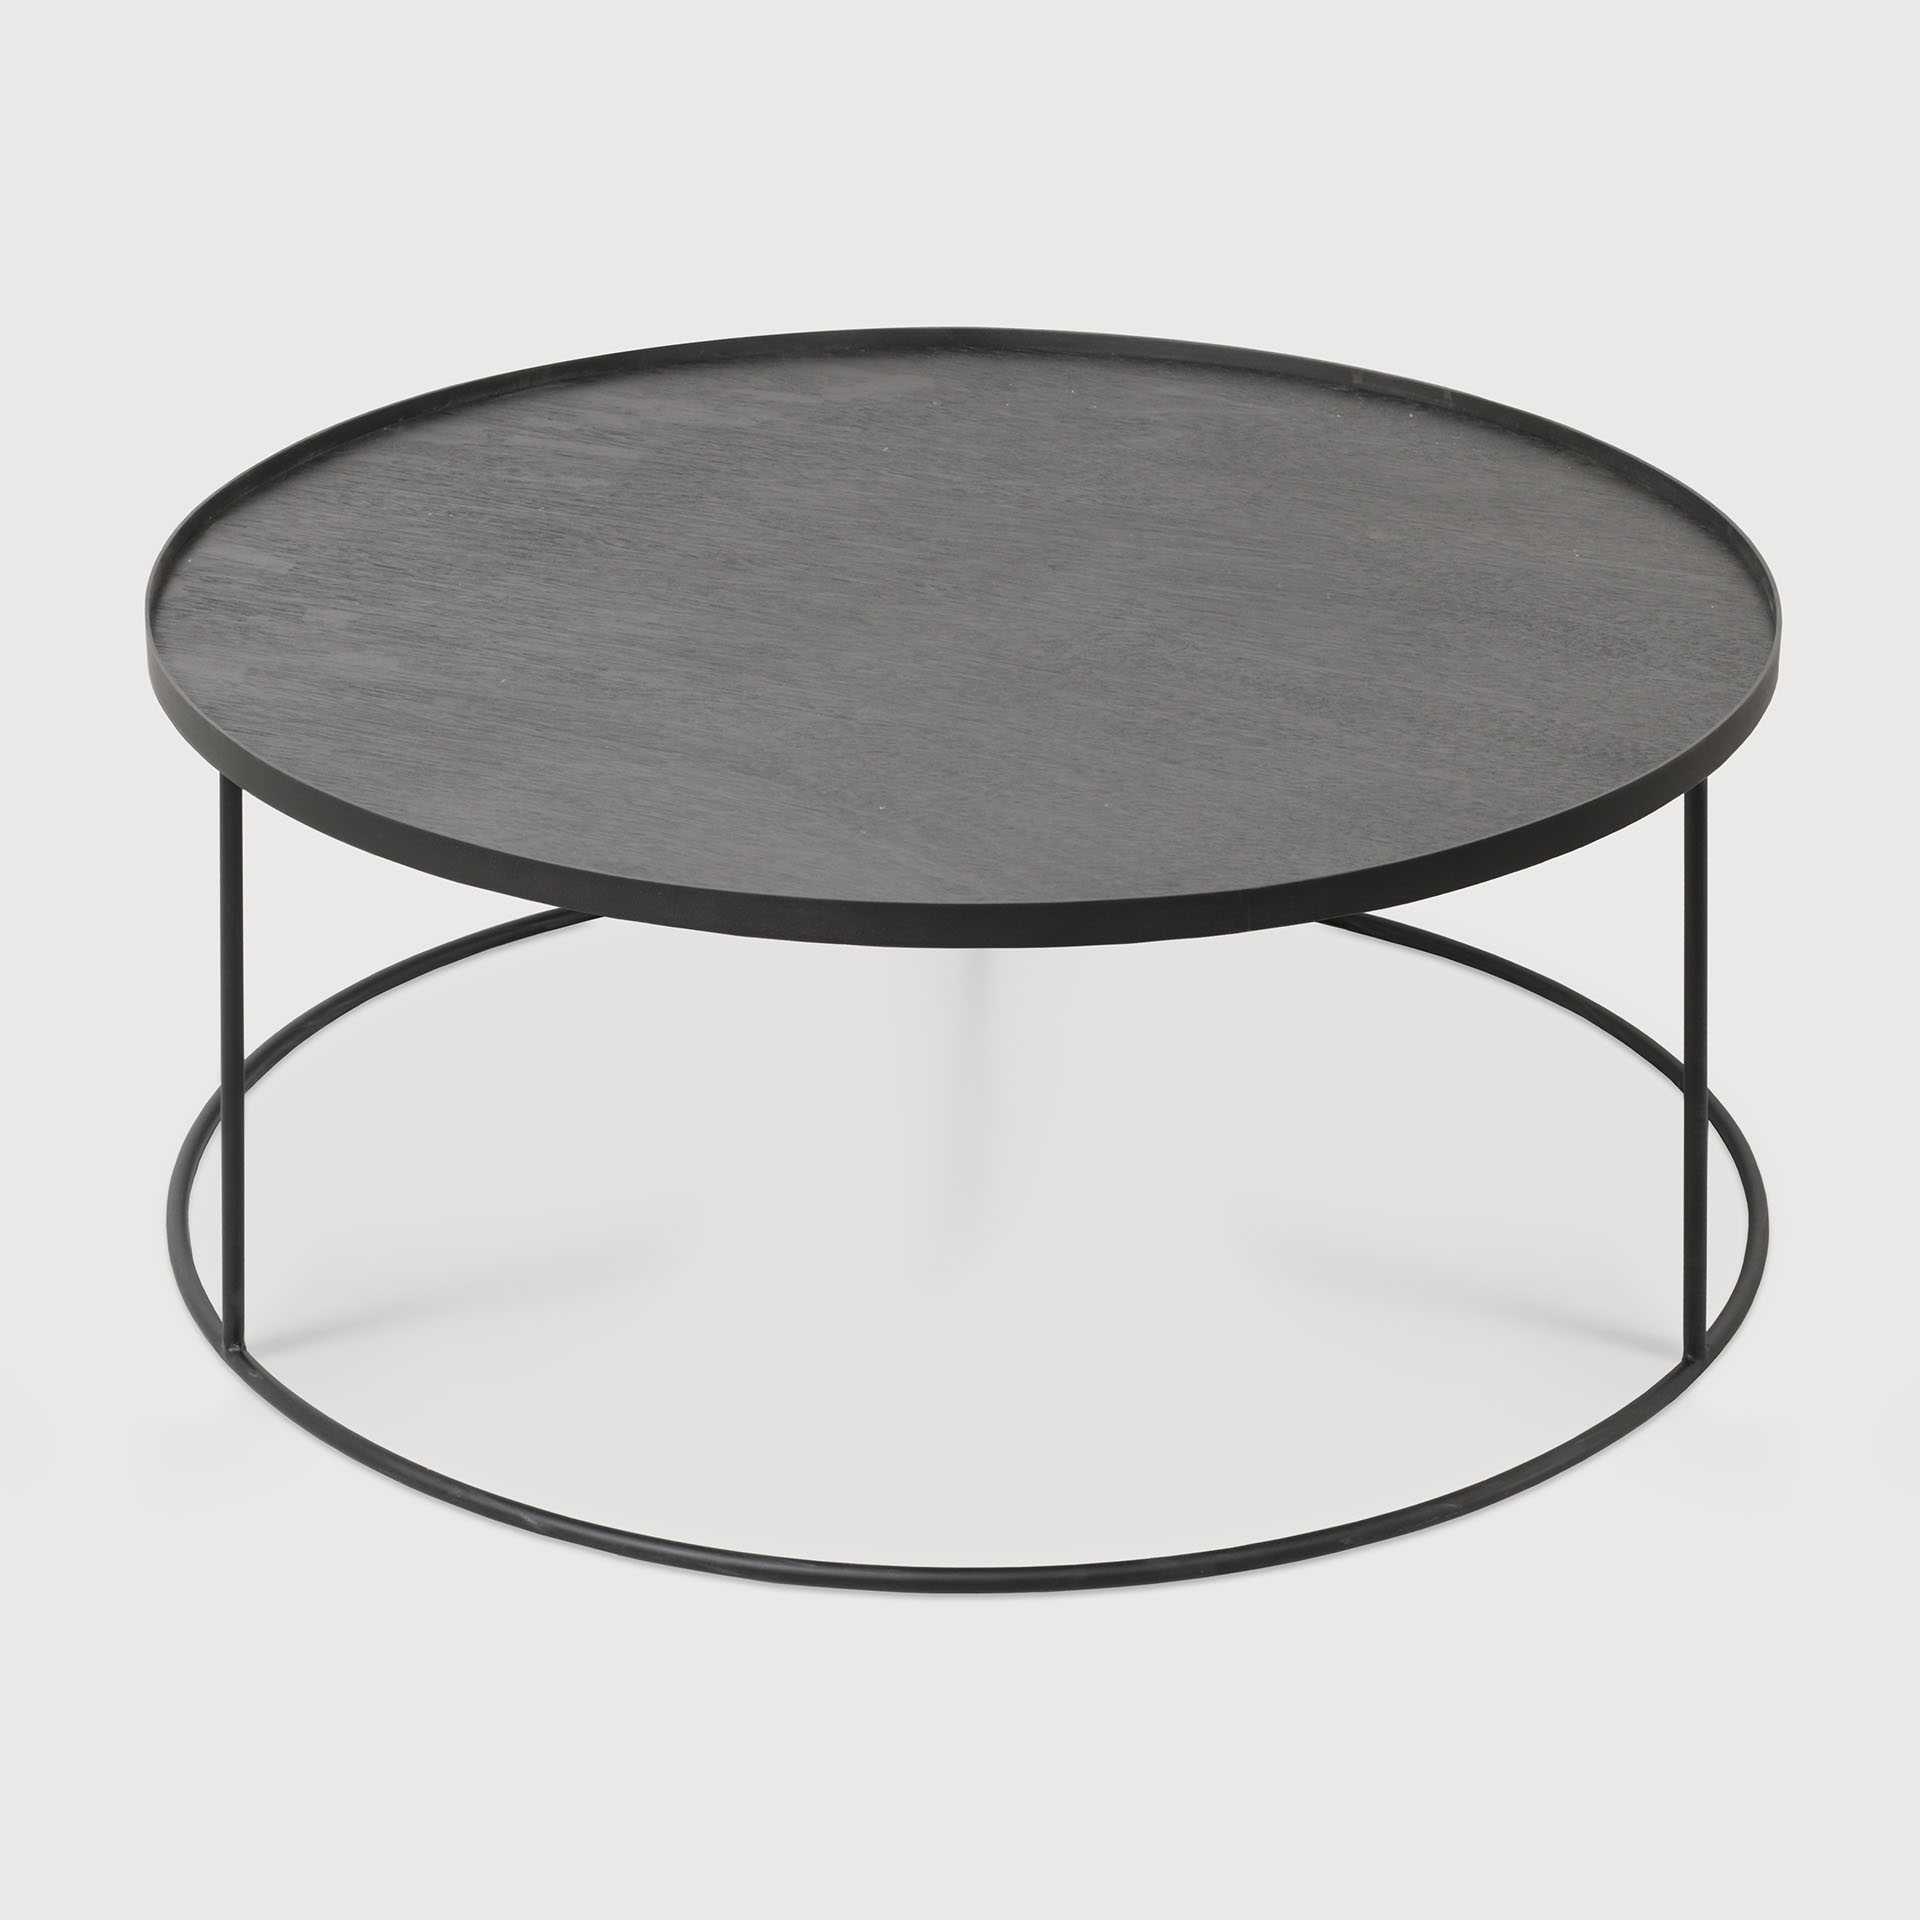 [20328] Round tray coffee table